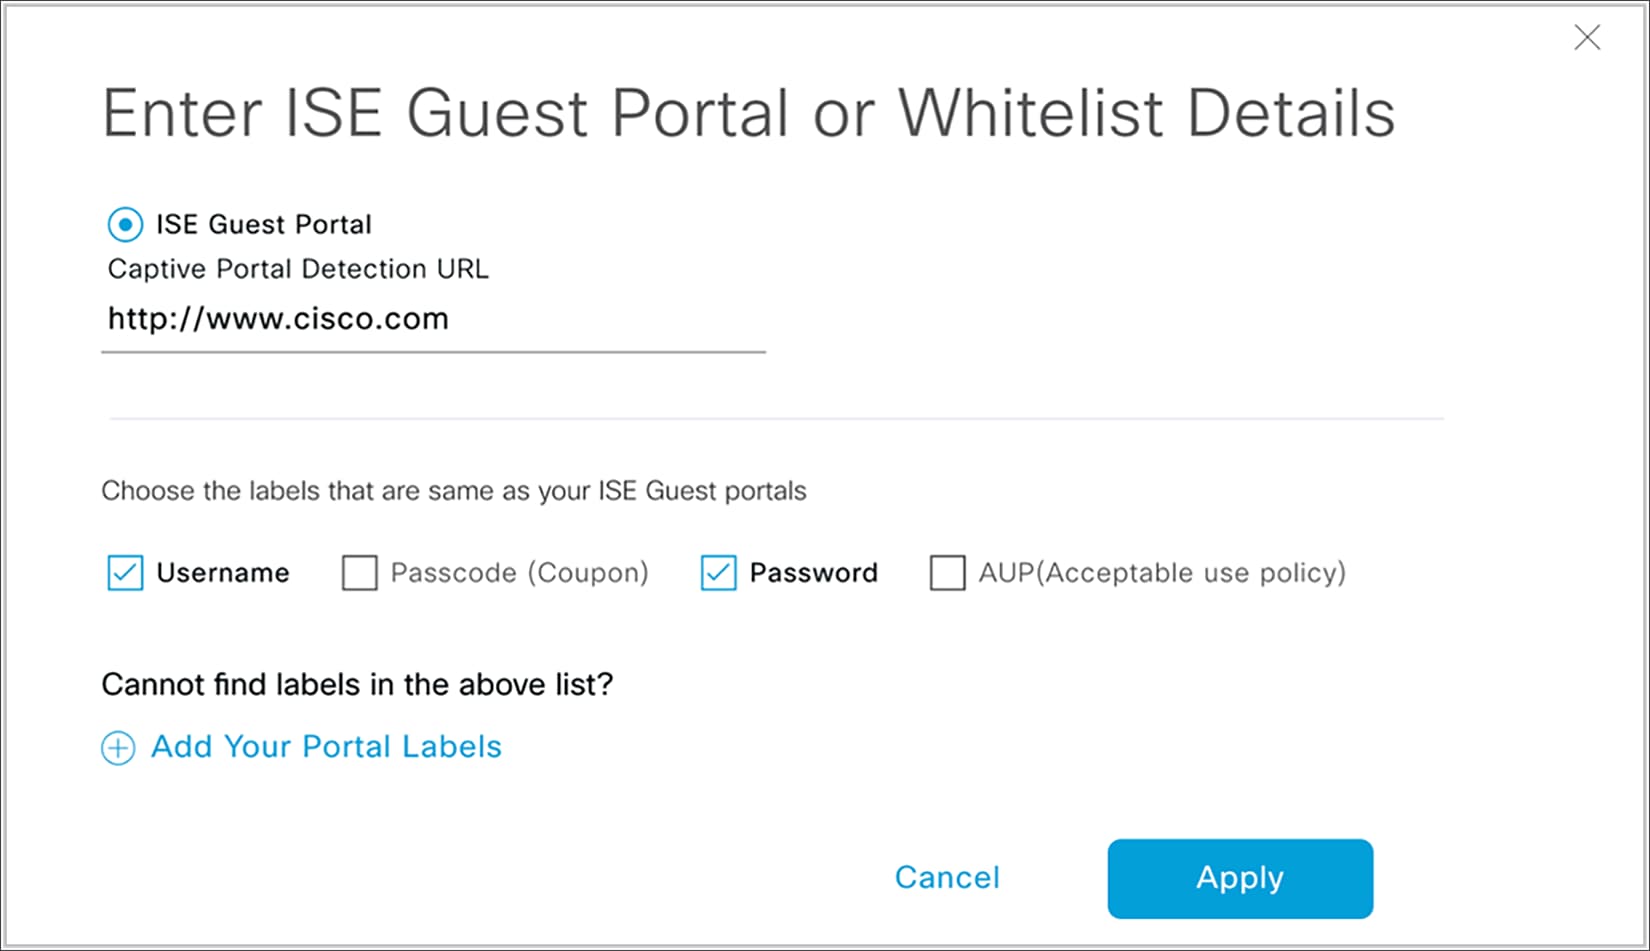 Configuring ISE guest portal details during test creation